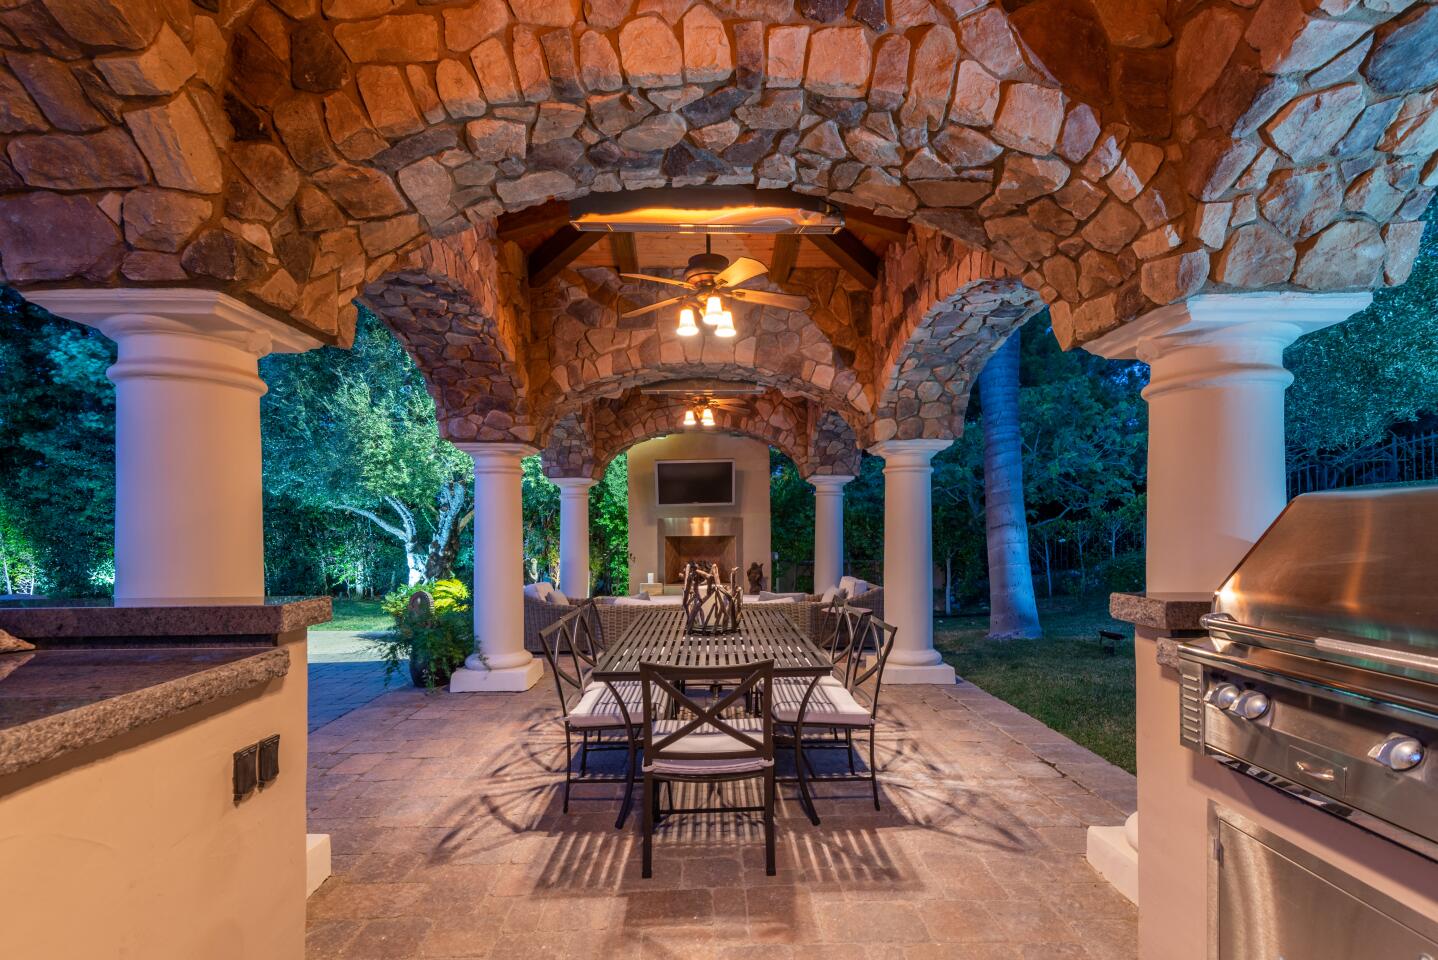 There are multiple outdoor living spaces, including a stone-clad dining pavilion with an outdoor kitchen.